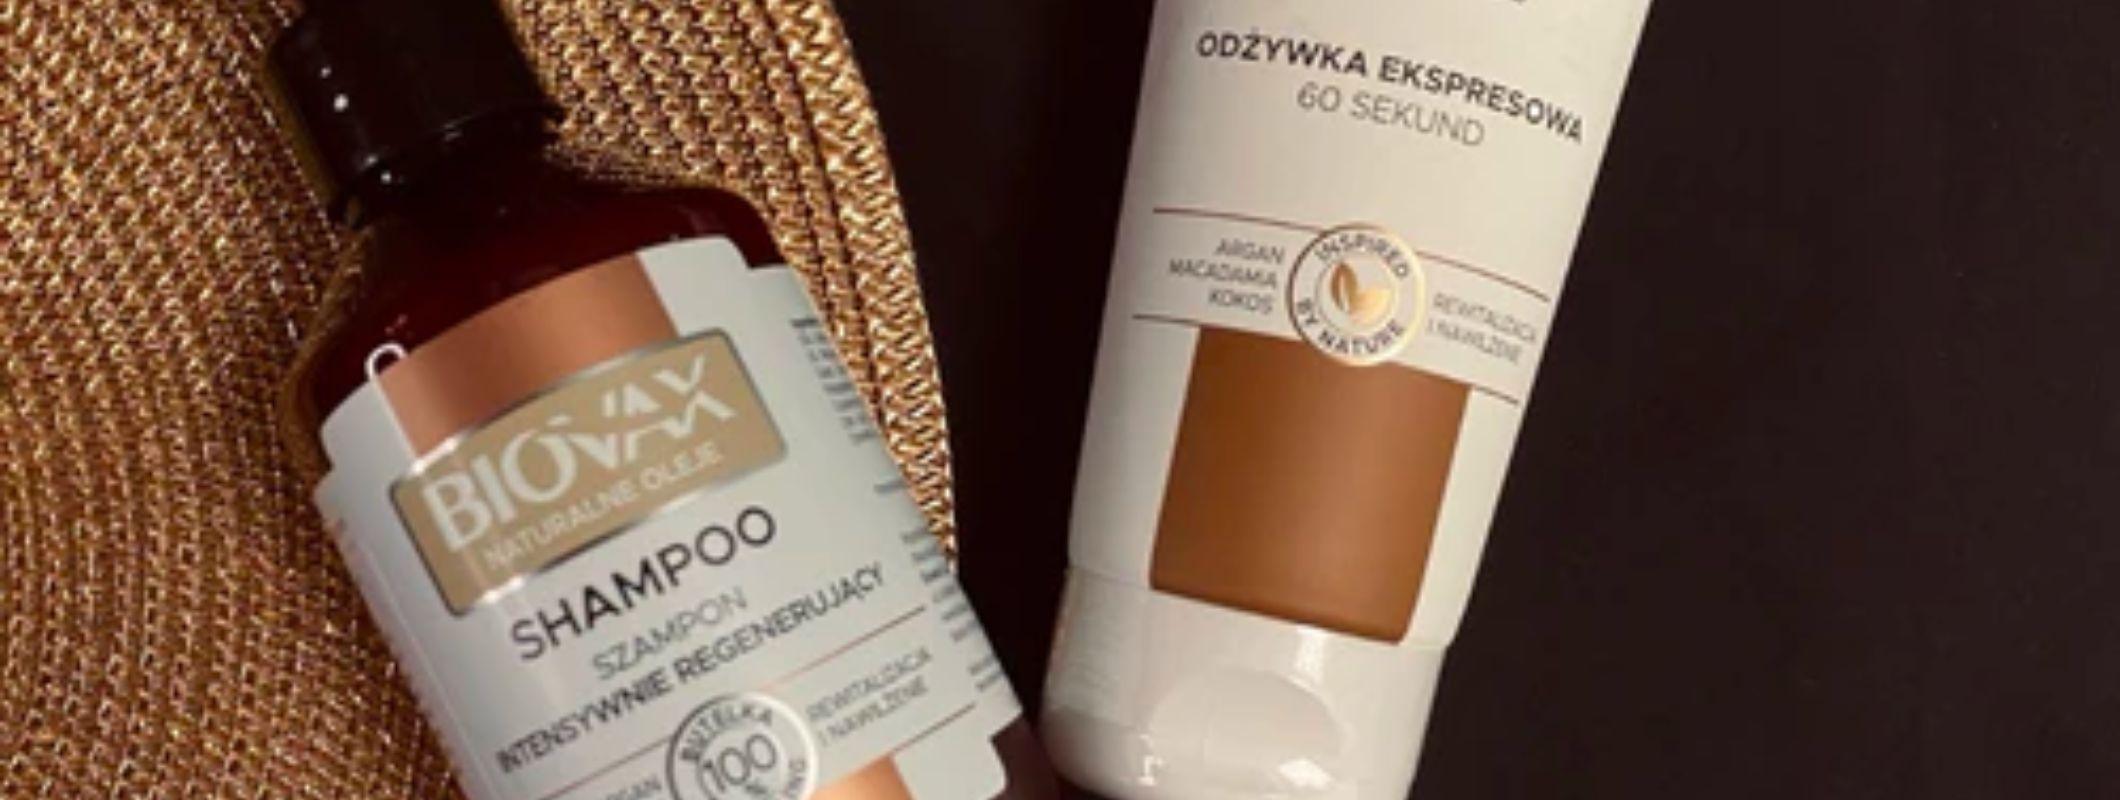 Cleopatra's hair beauty secret revealed - L'BIOTICA BIOVAX hair care line with argan, macadamia and coconut oils